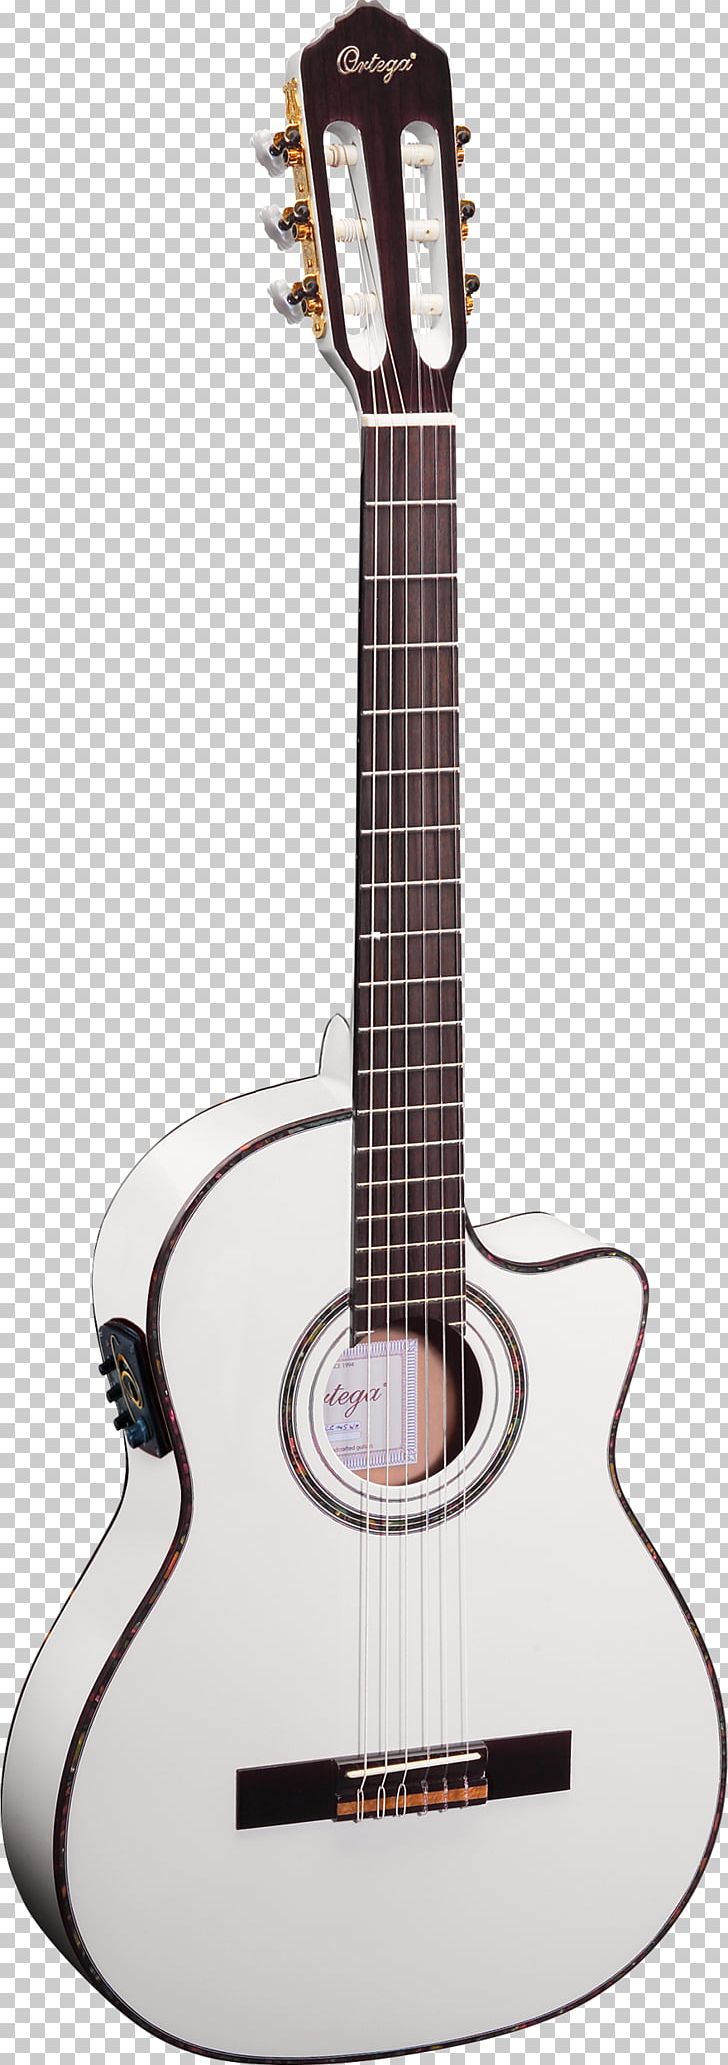 Steel-string Acoustic Guitar Musical Instruments Classical Guitar PNG, Clipart, Acoustic Electric Guitar, Amancio Ortega, Classical Guitar, Cuatro, Guitar Accessory Free PNG Download